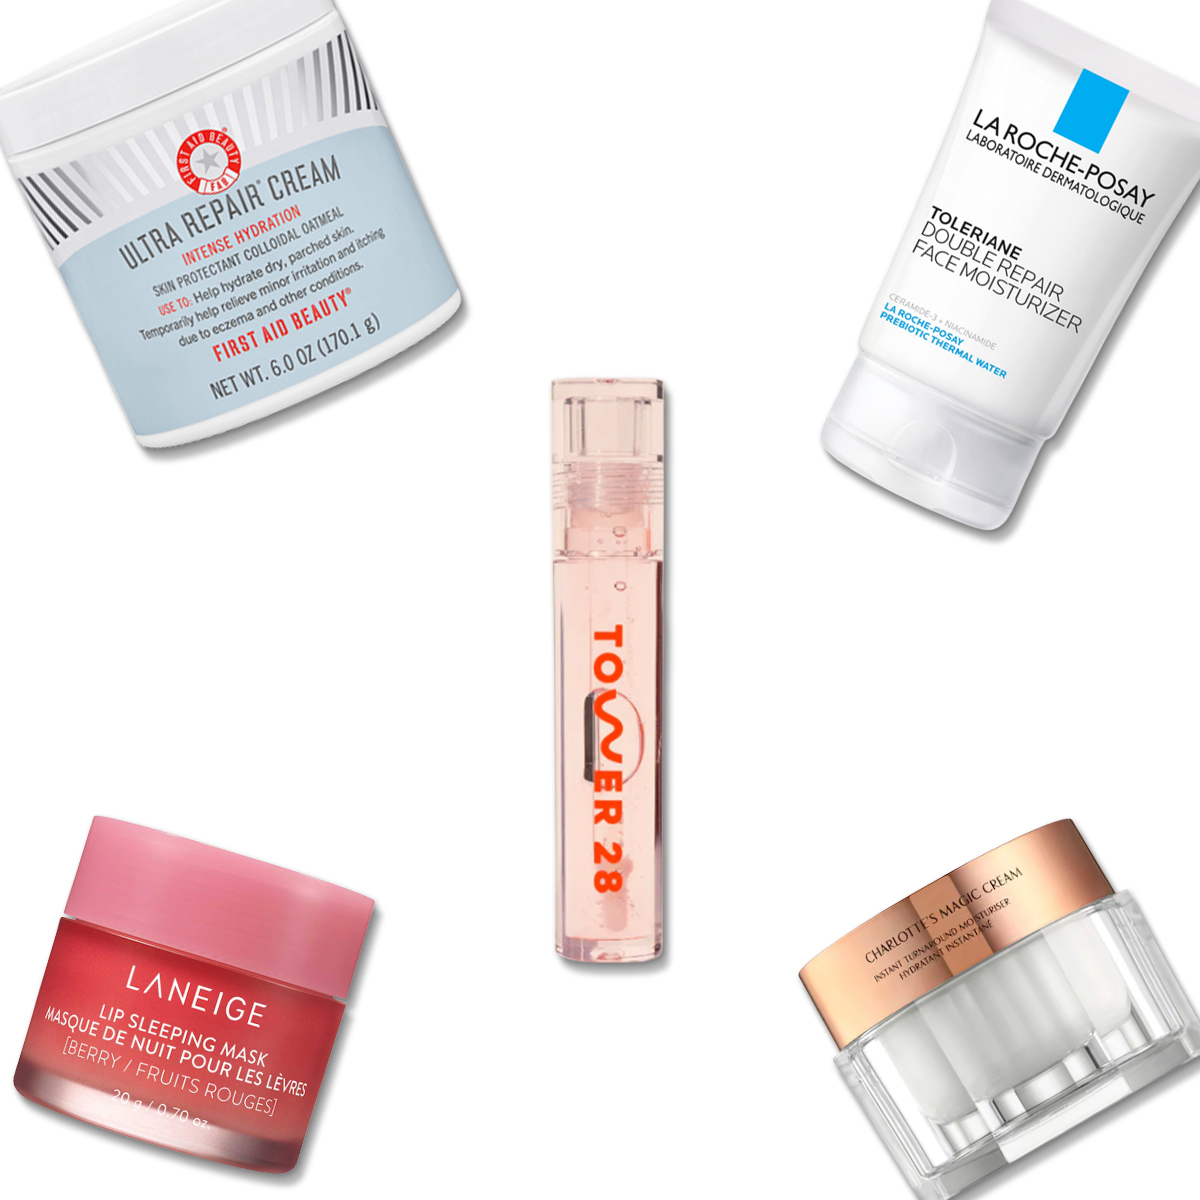 products for very dry skin